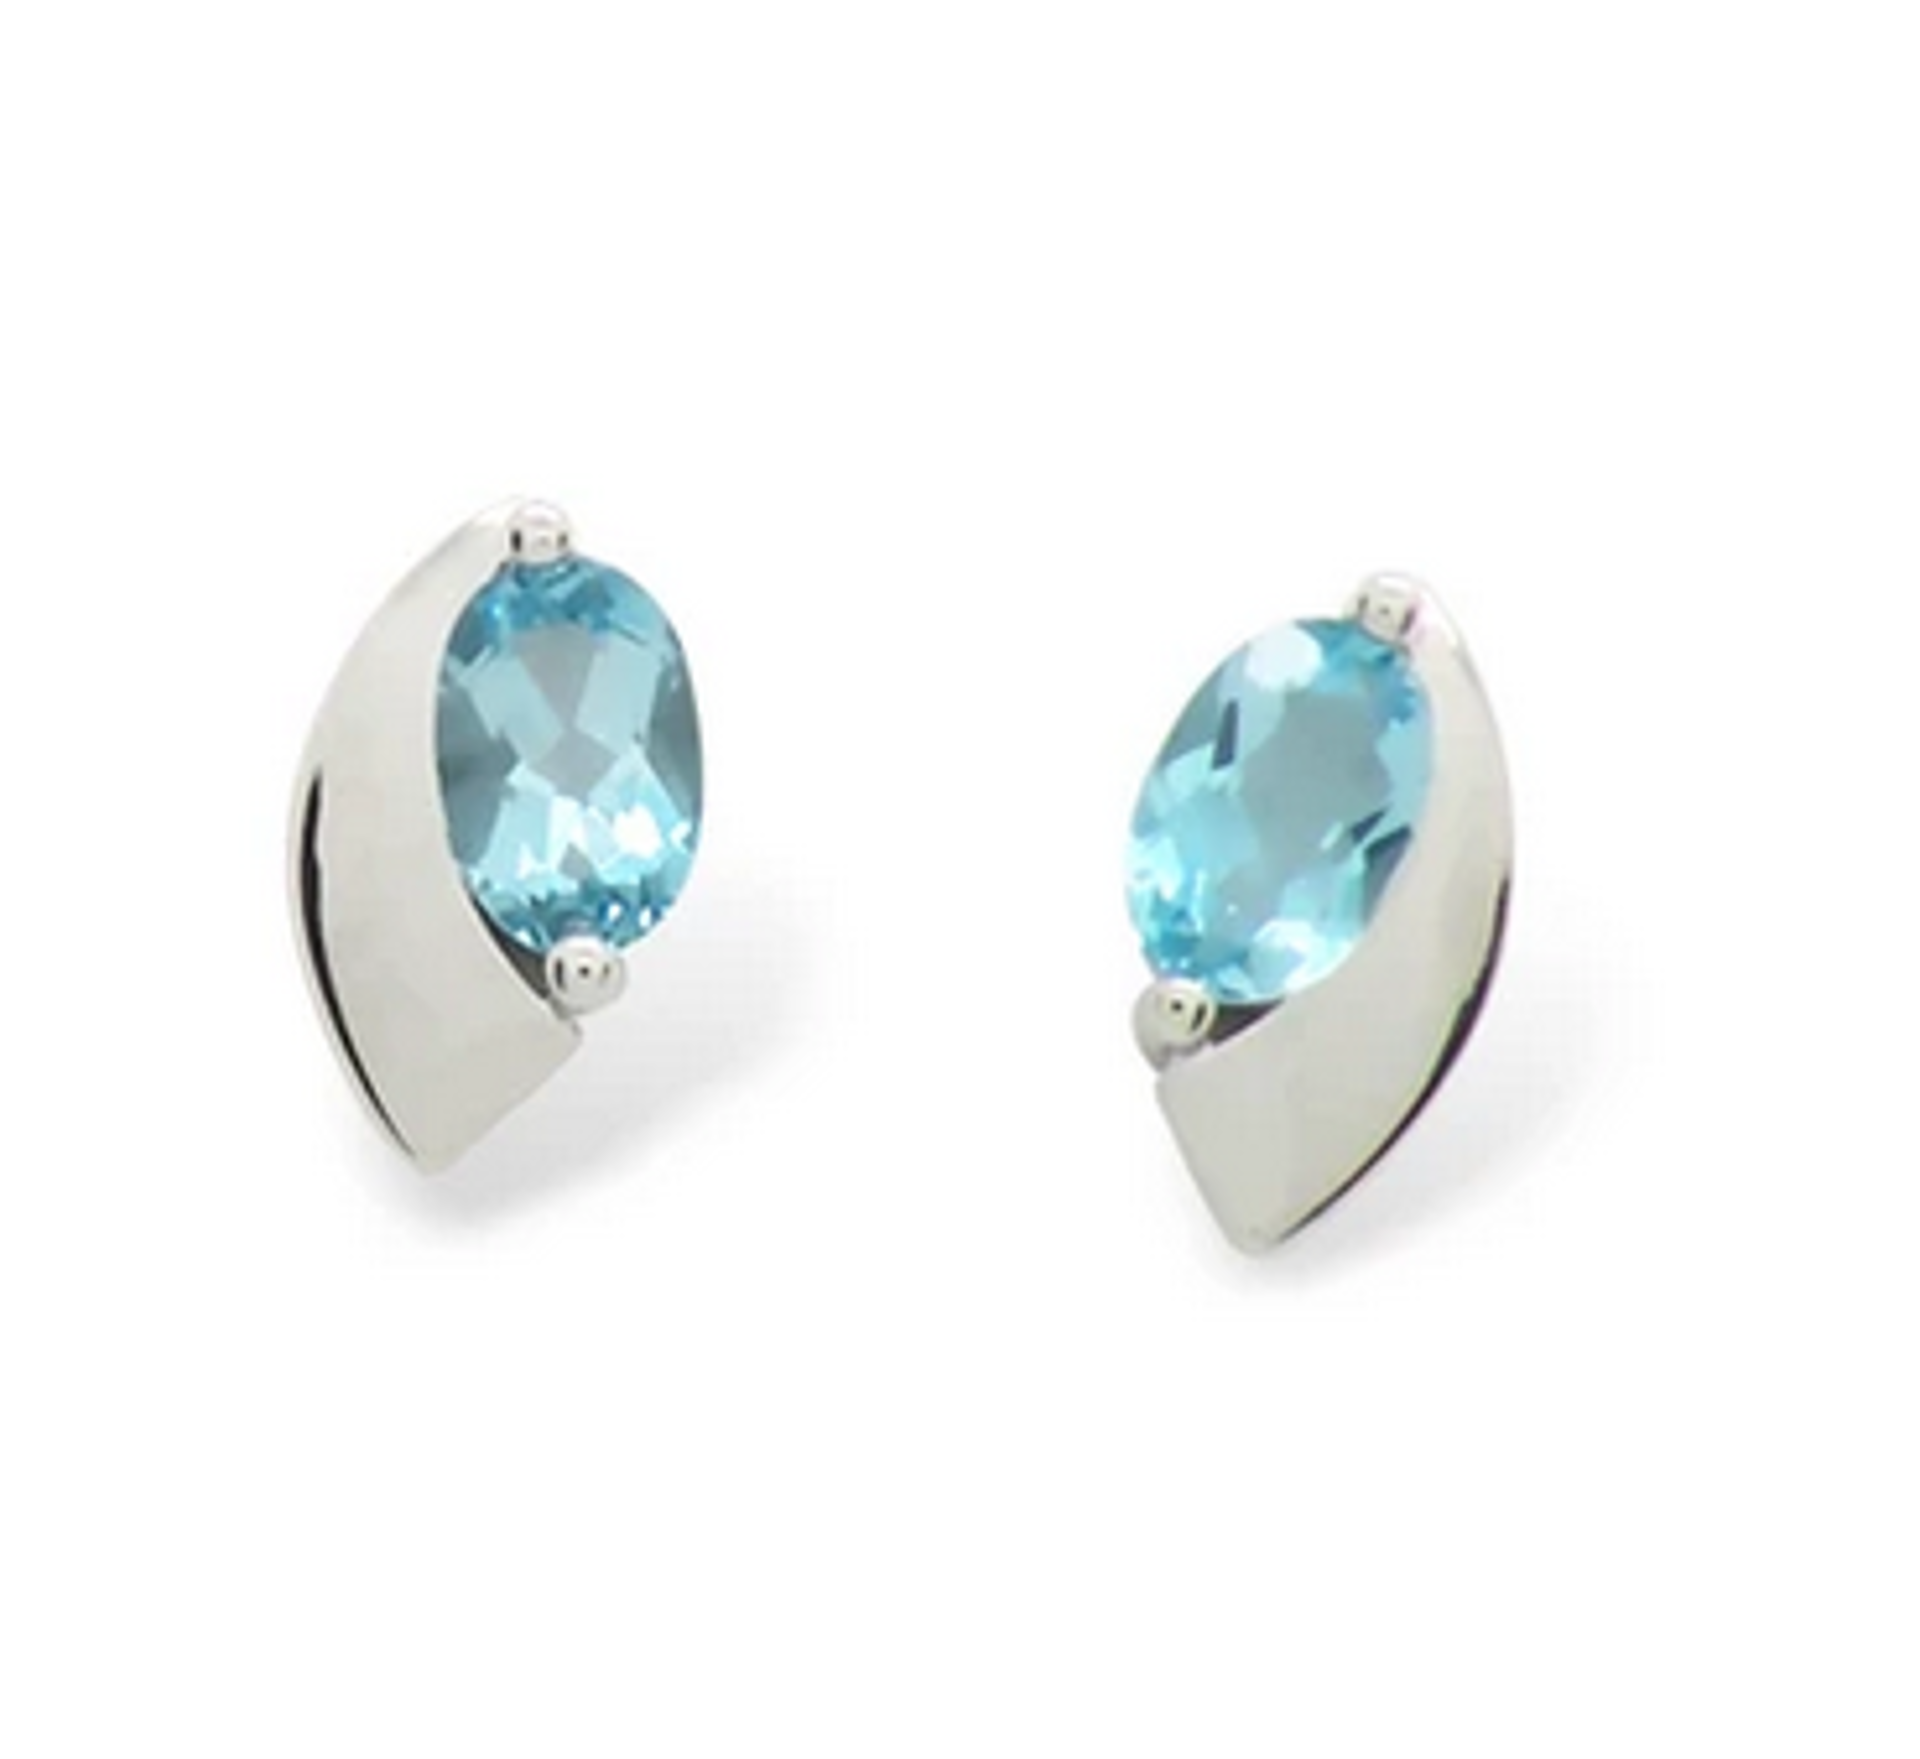 Earrings - Blue Topaz Droplet With Polished Sterling Silver E9298BT by Joryel Vera